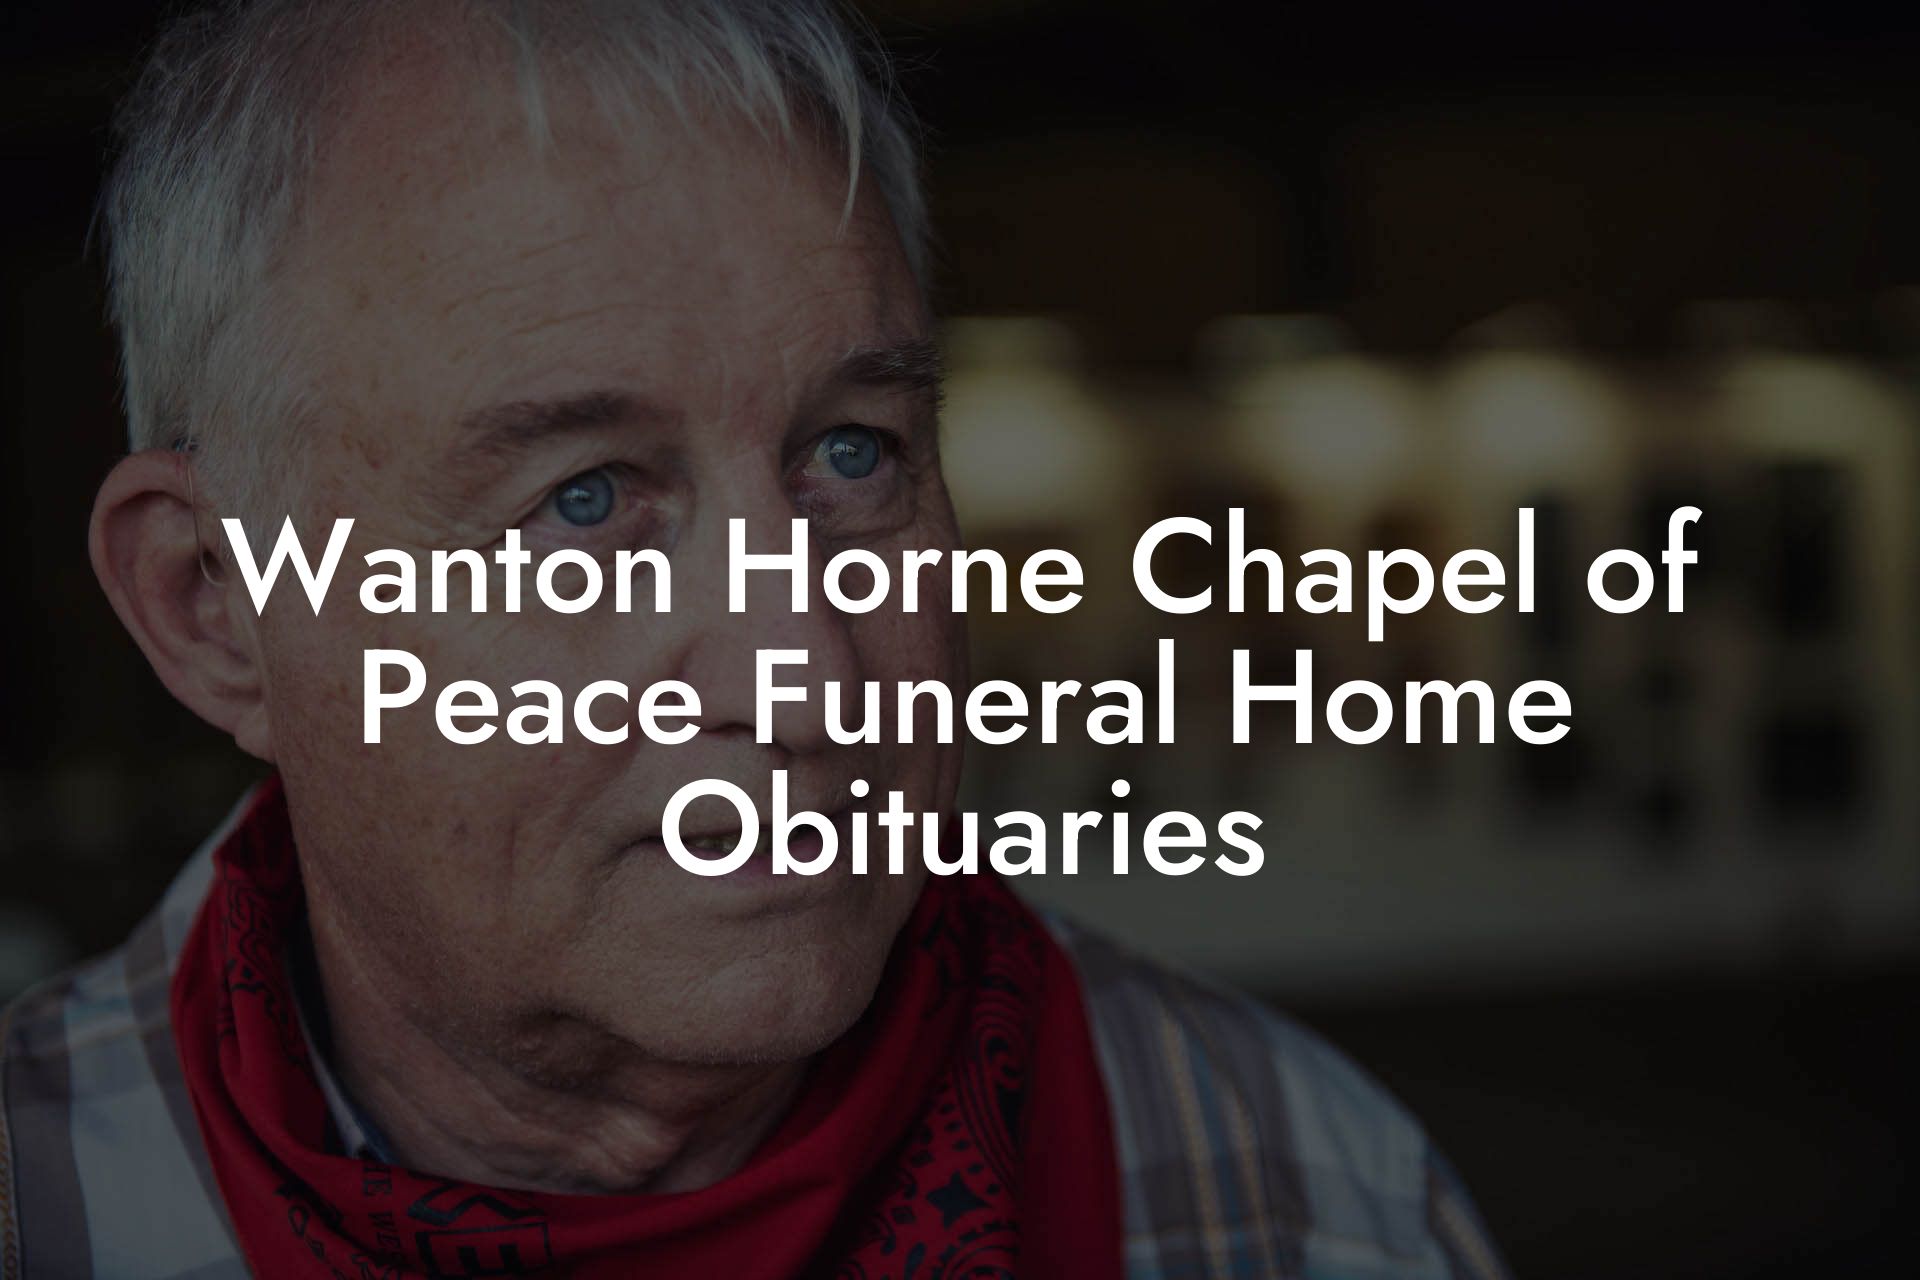 Wanton Horne Chapel of Peace Funeral Home Obituaries